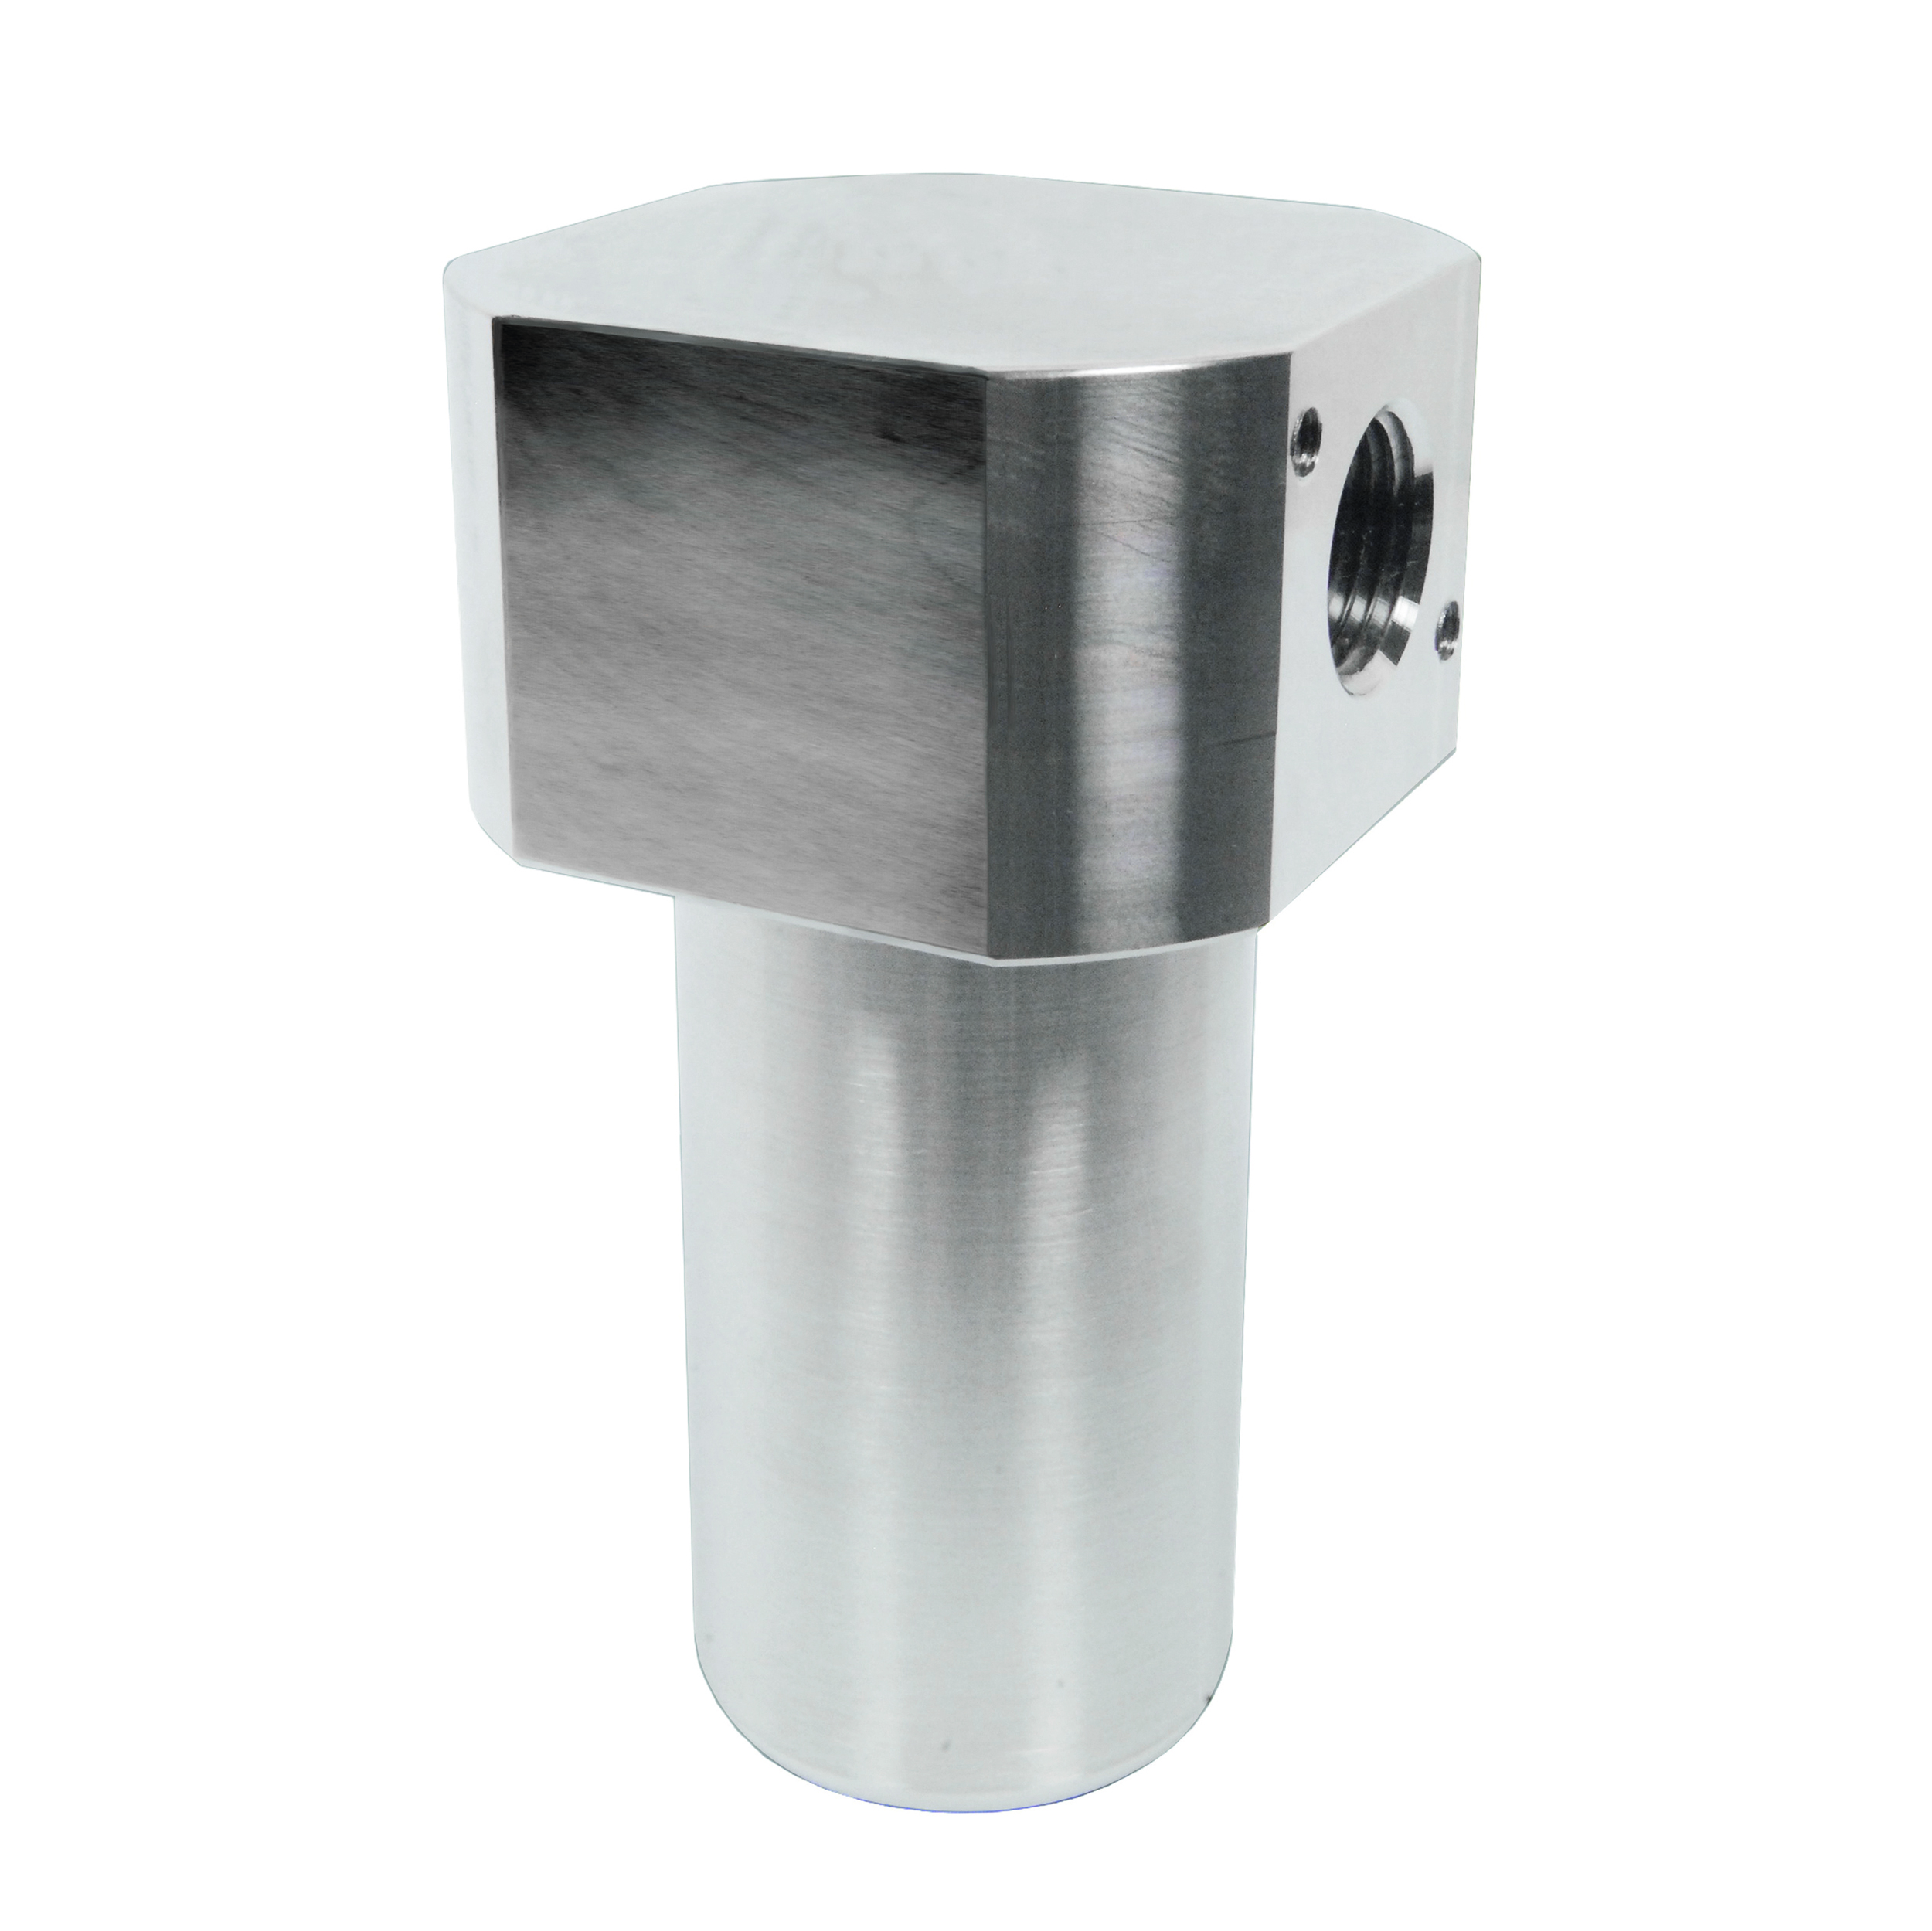 Compressed air filter type 692 stainless steel, drain valve excluded, BG 20, G¼, filter porosity: 25 µm, QN: 2,500 Nl/min